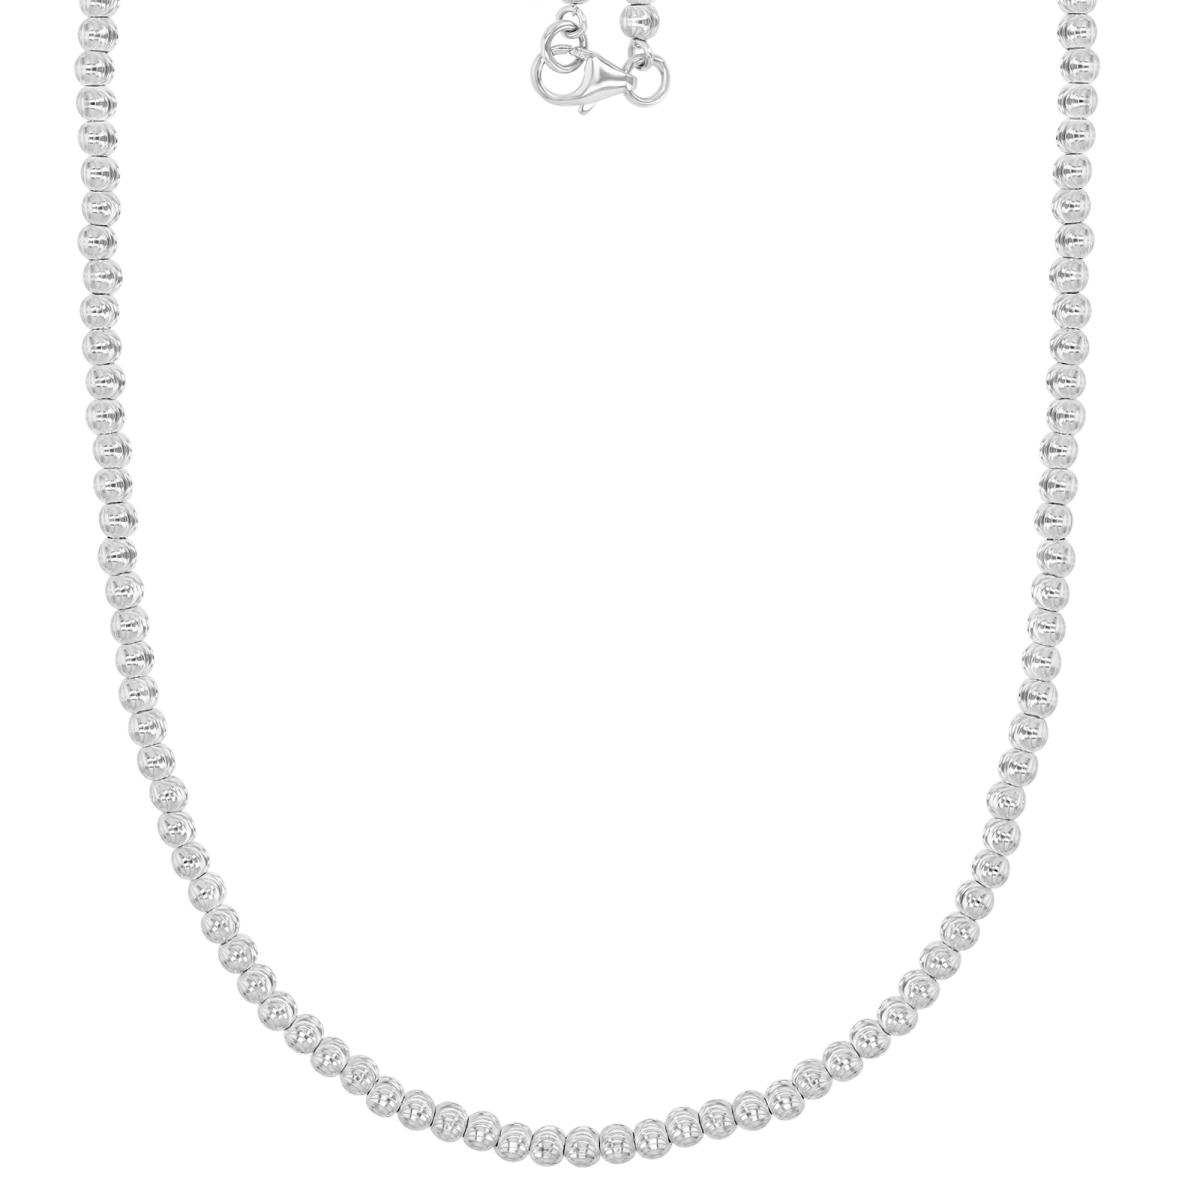 Sterling Silver Anti-Tarnish 3MM Polished & Diamond Cut Bead 20" Chain Necklace